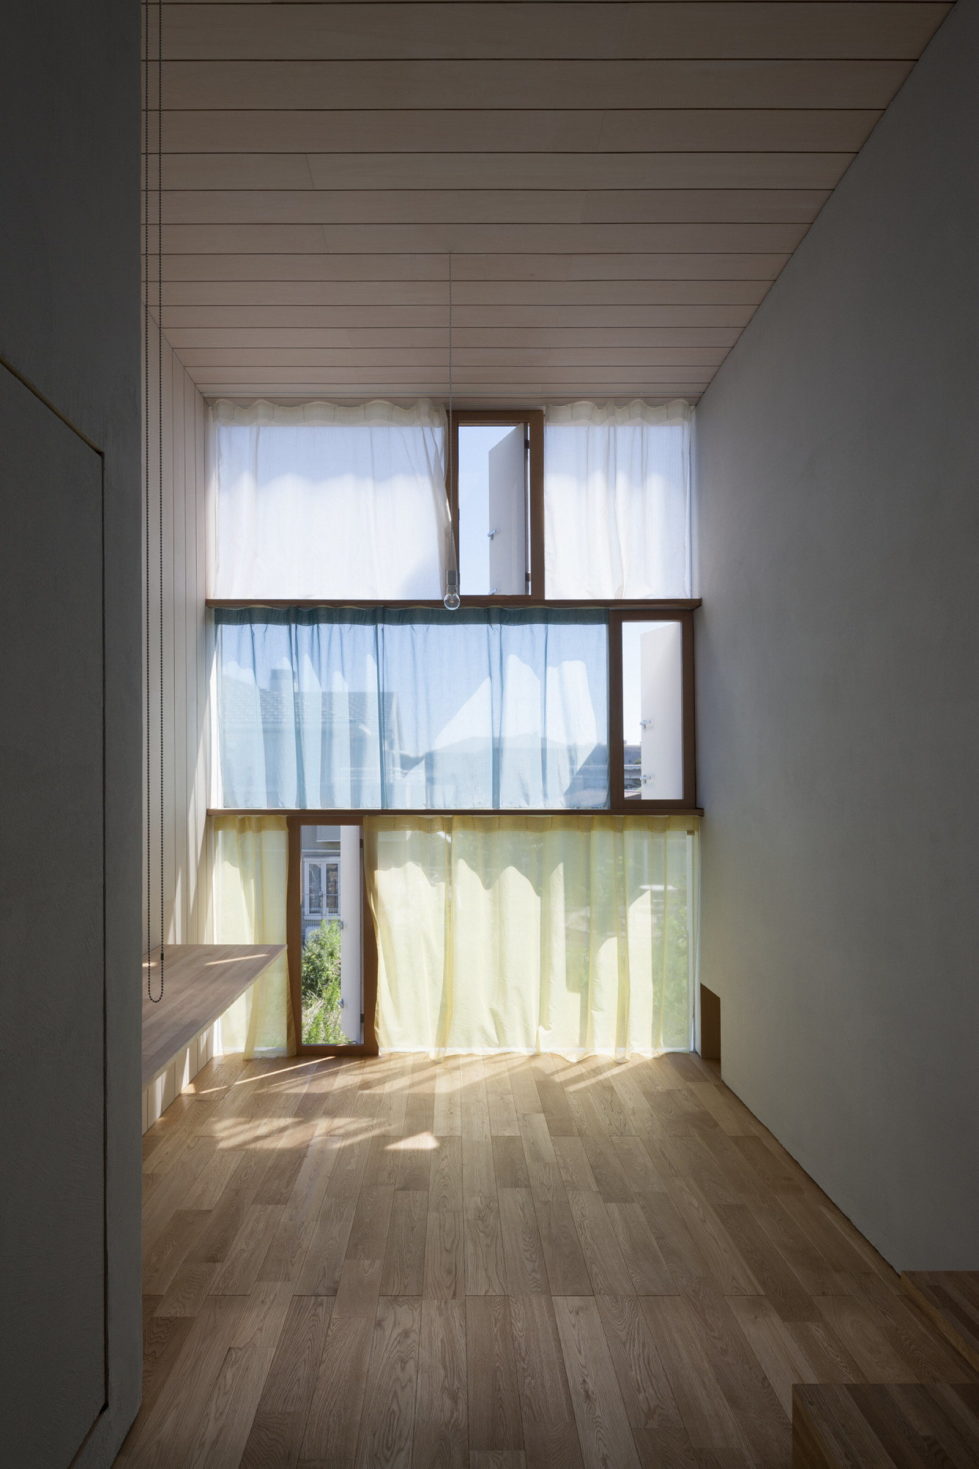 The family idyll in Japan from the Ihrmk studio 6